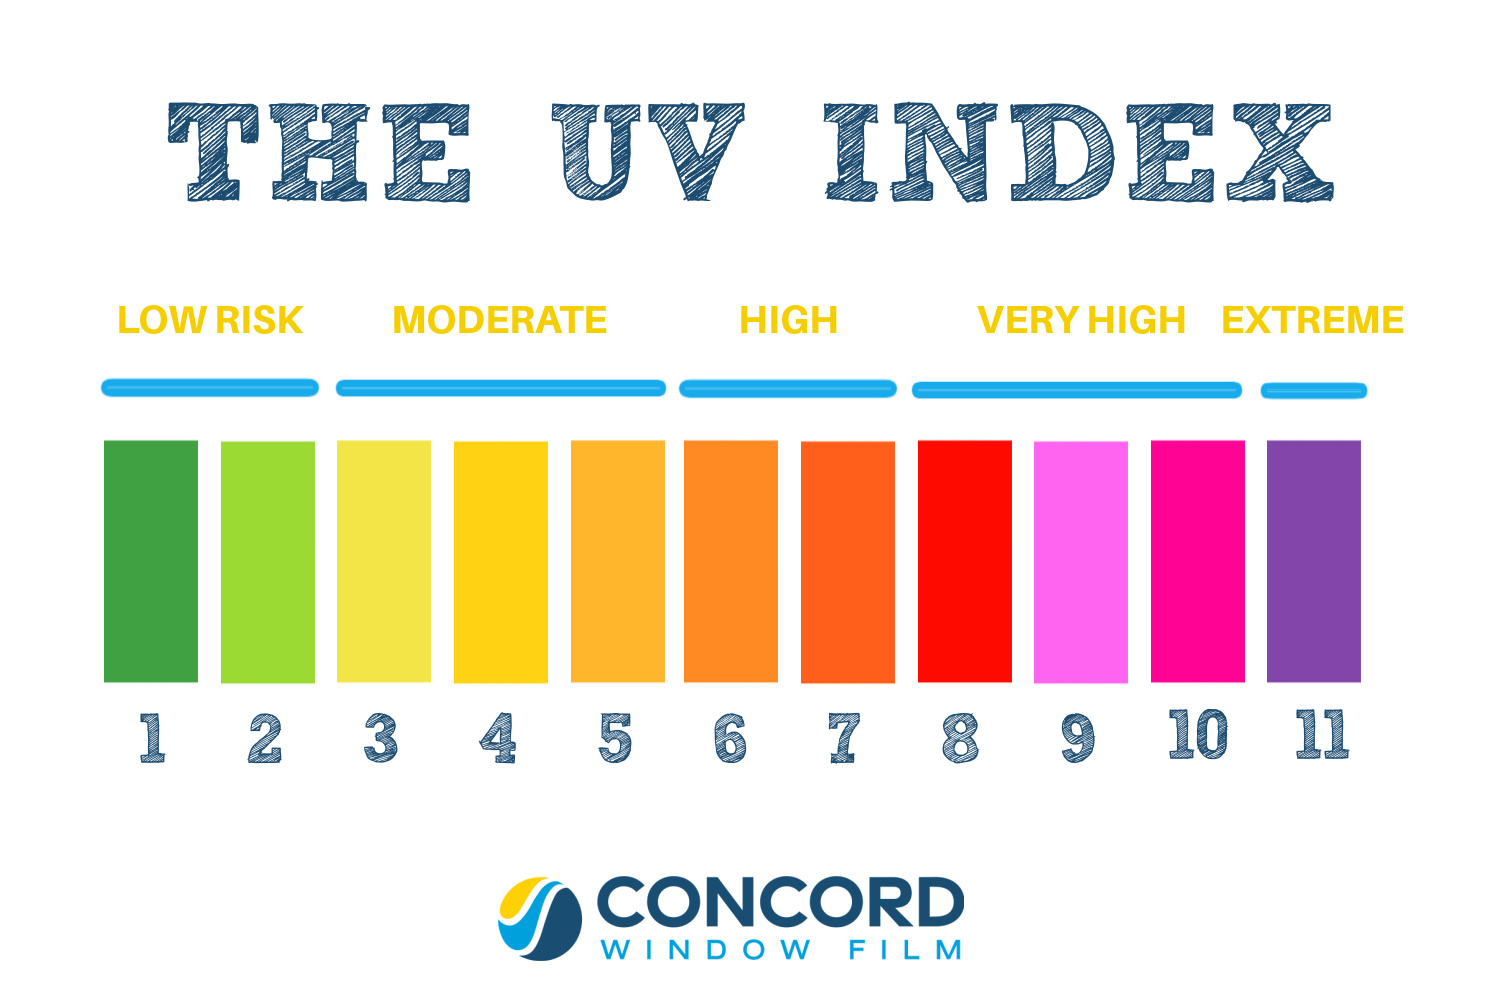 An image depicting the UV Index scale